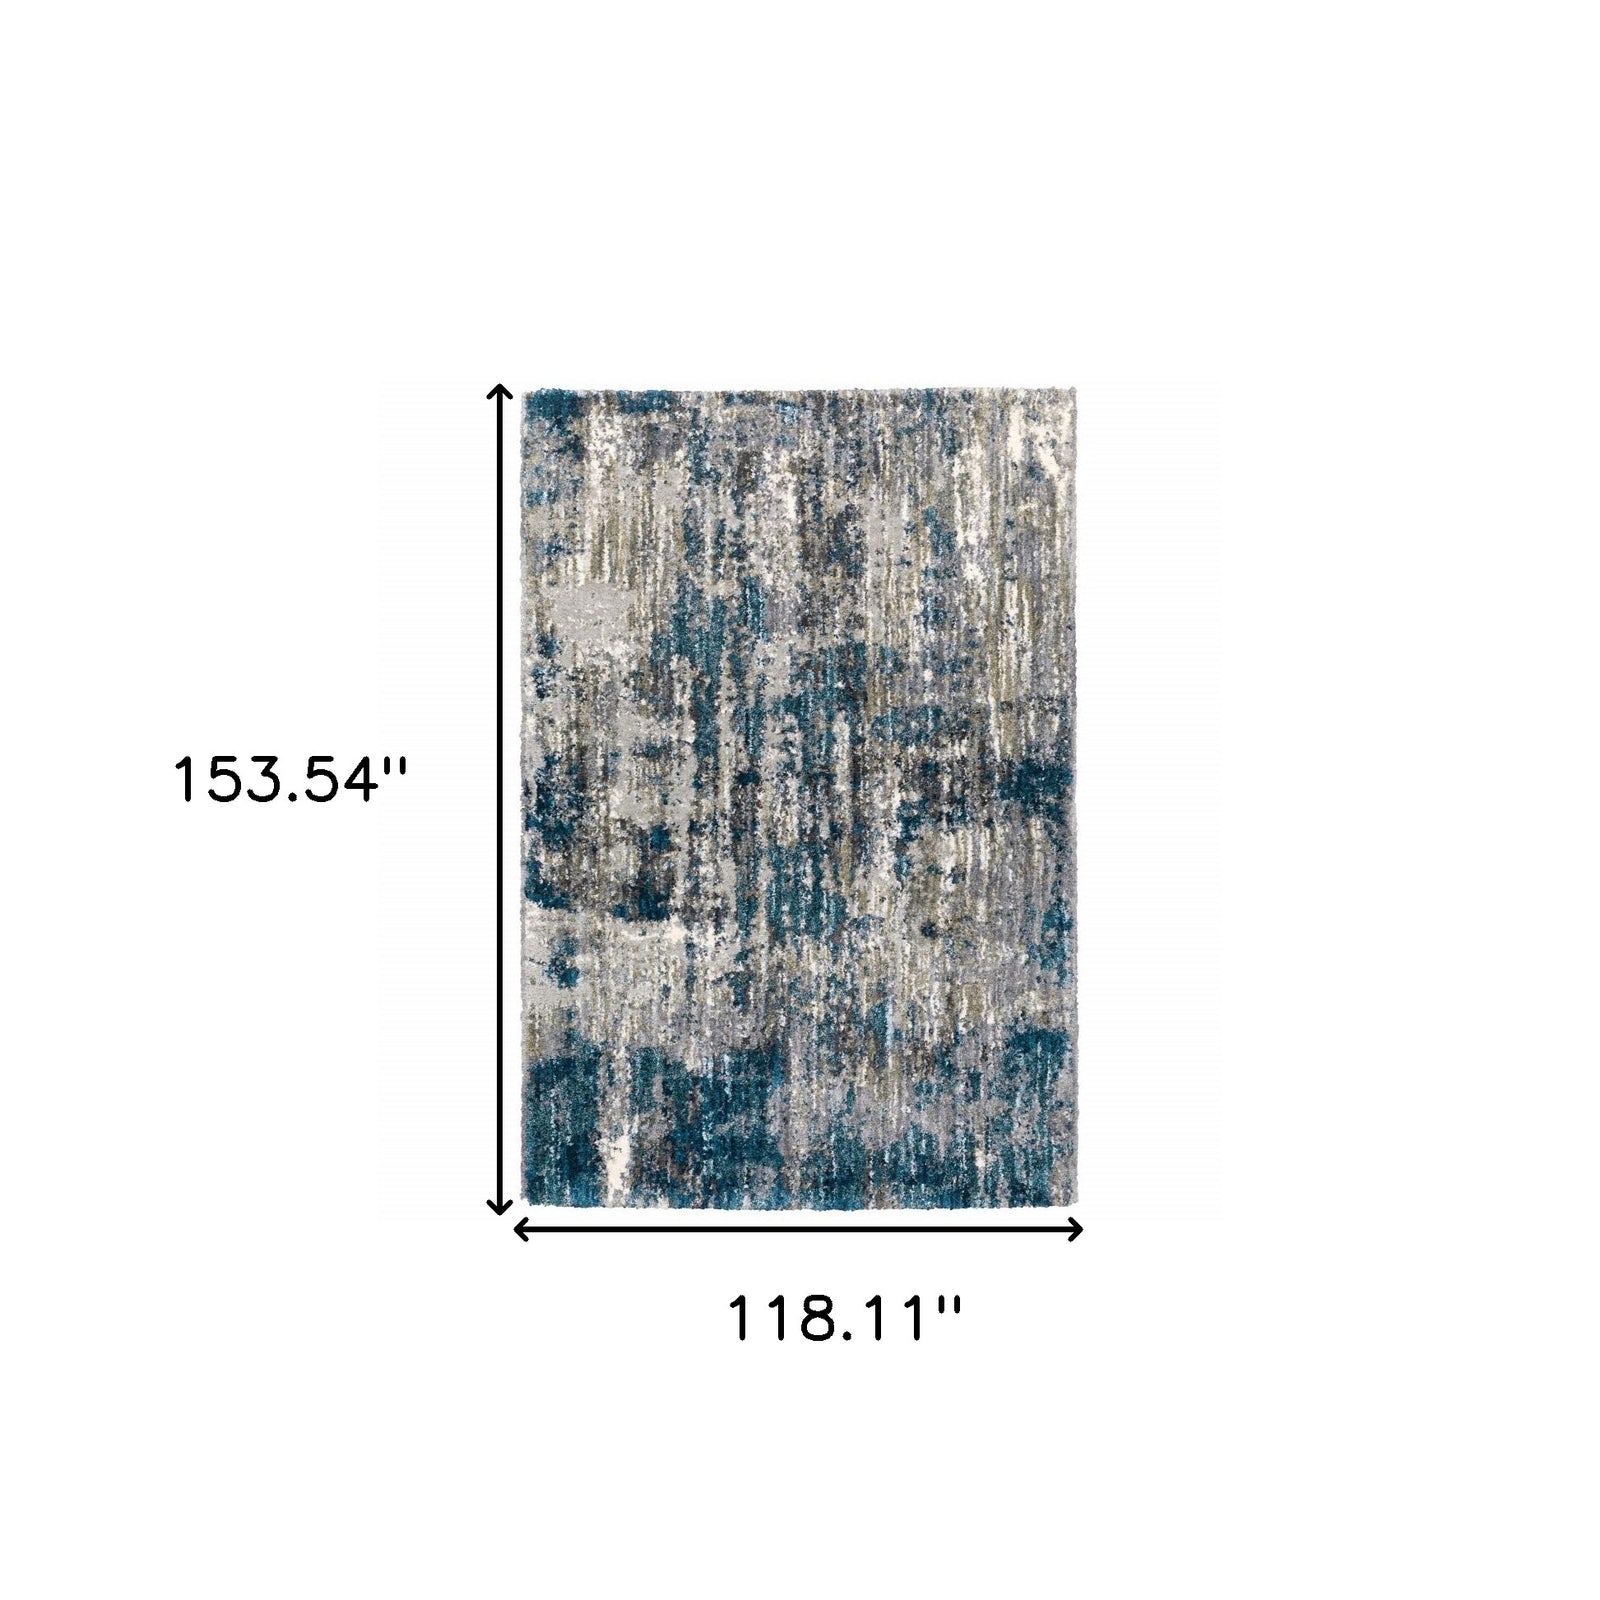 4'X6' Gray And Blue Gray Skies Area Rug